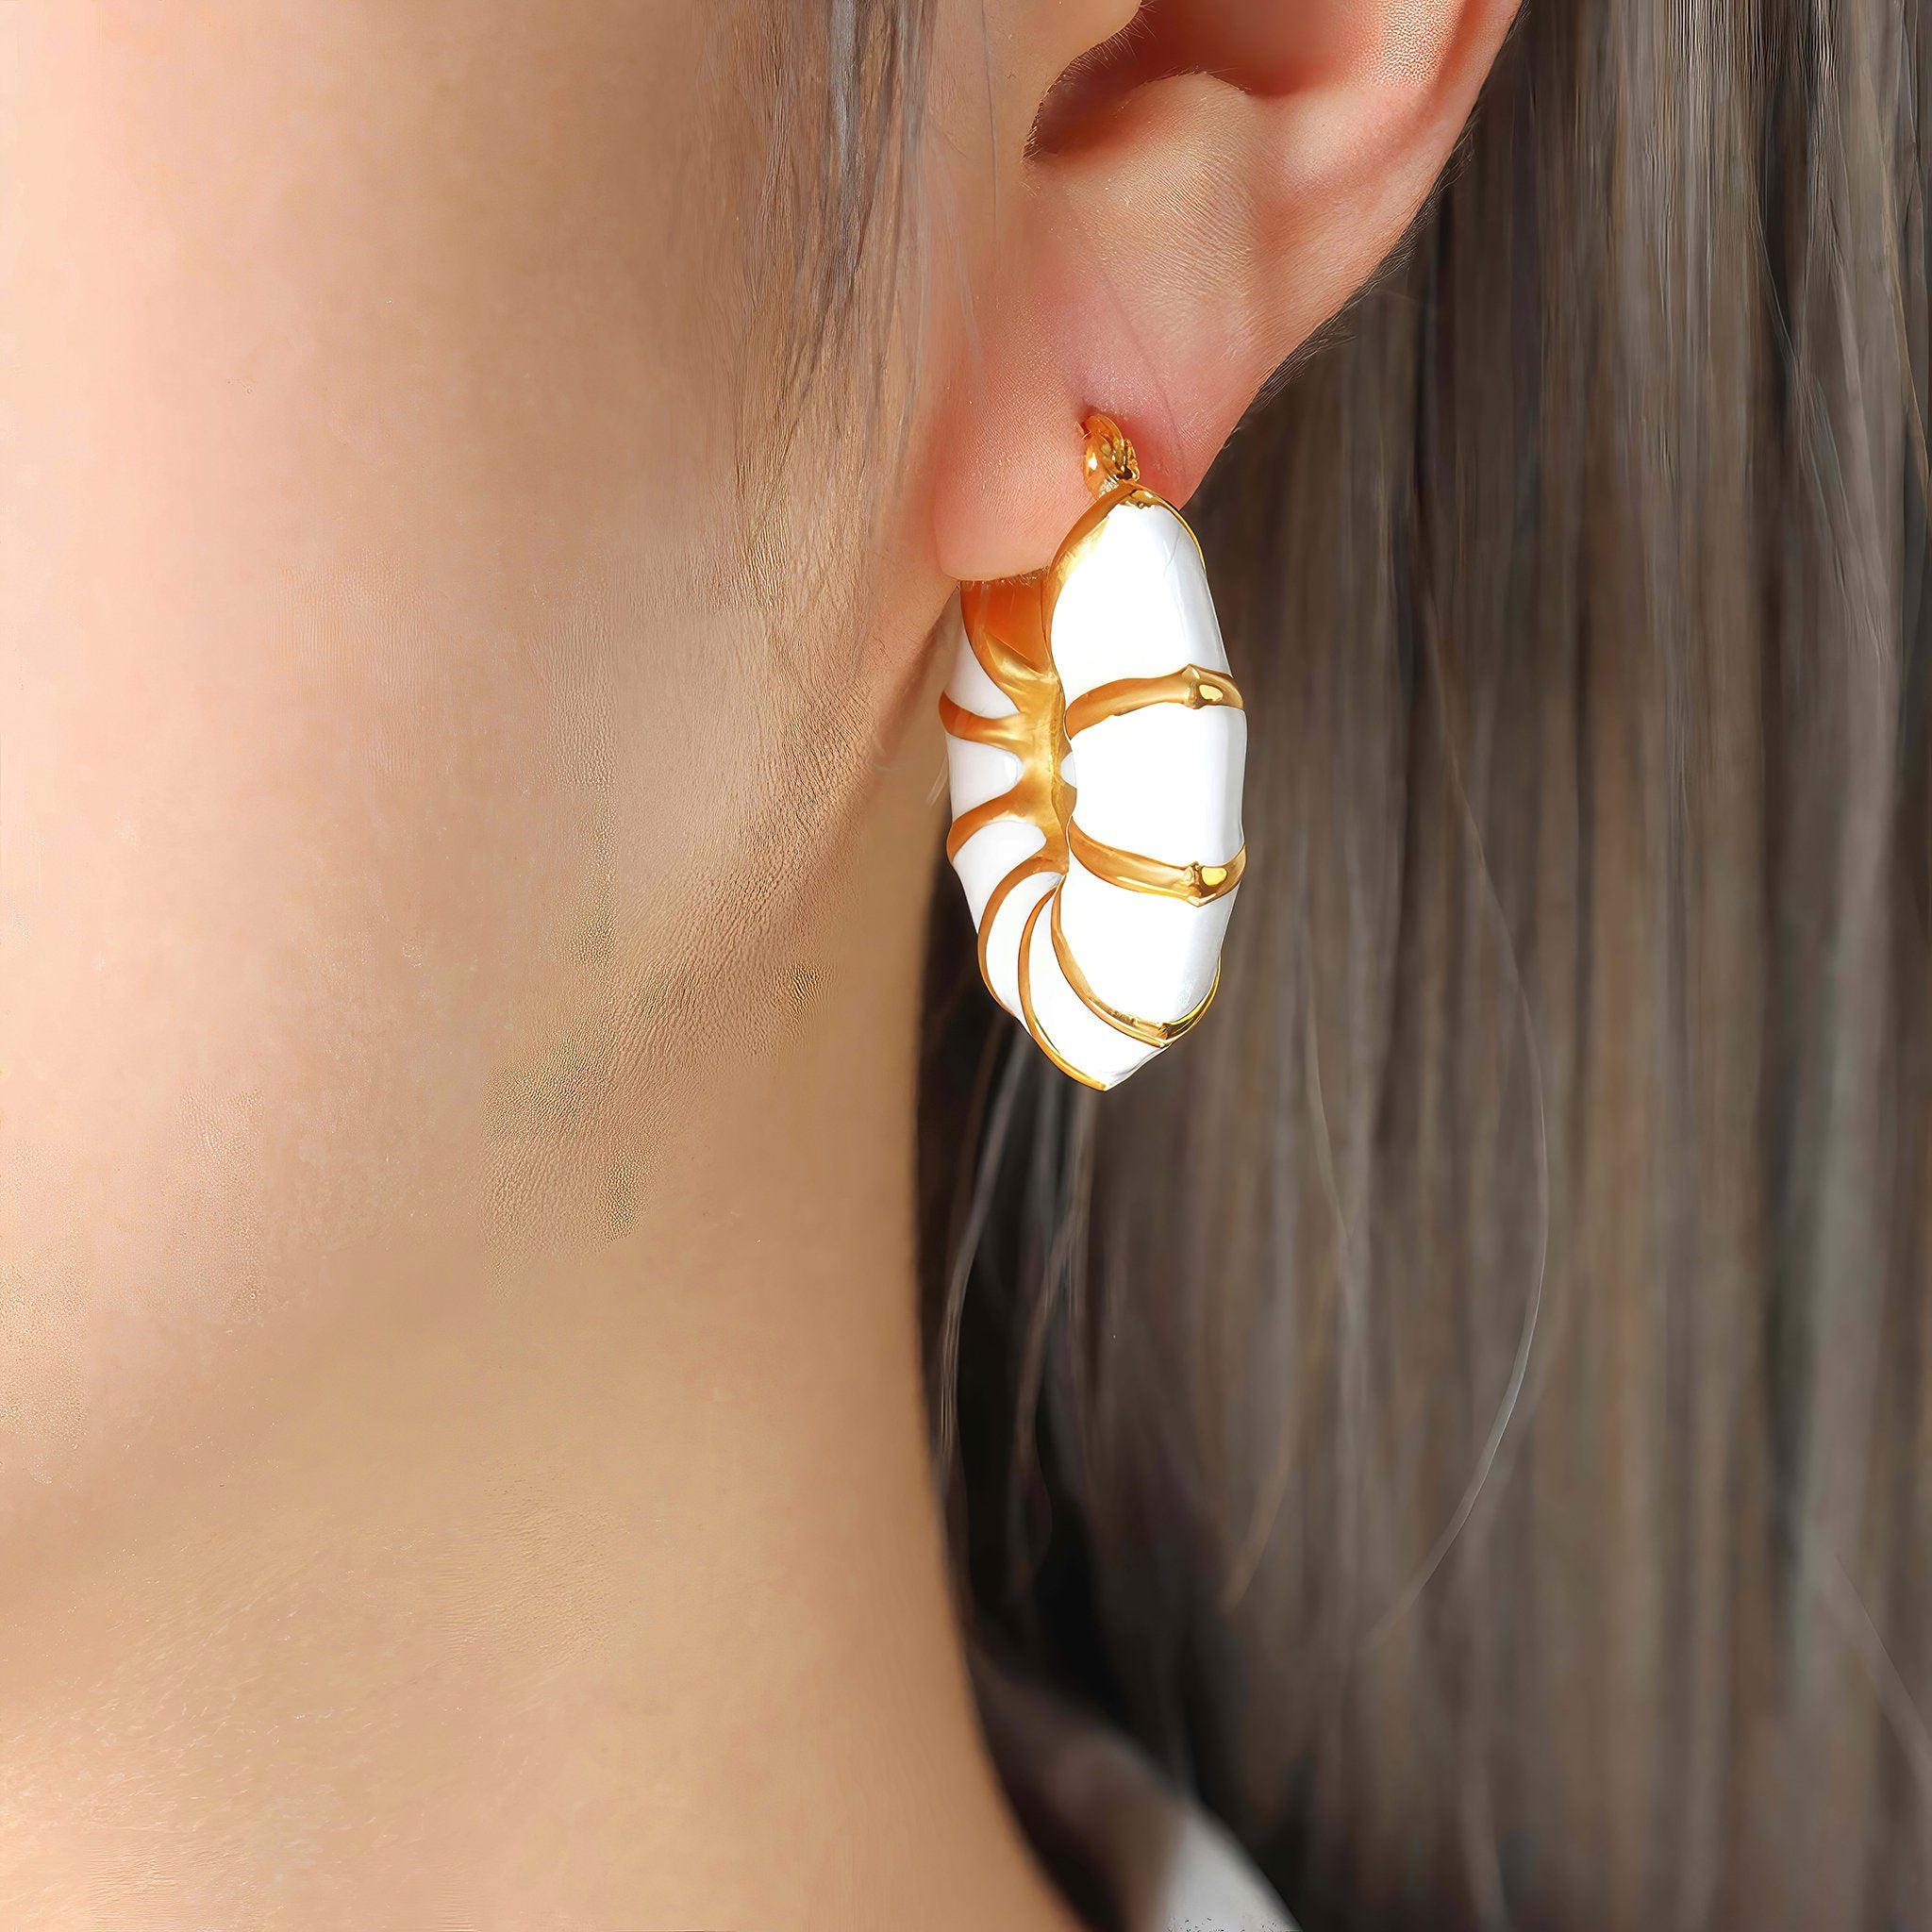 Round Bamboo Design Earrings - Nobbier - Earrings - 18K Gold And Titanium PVD Coated Jewelry